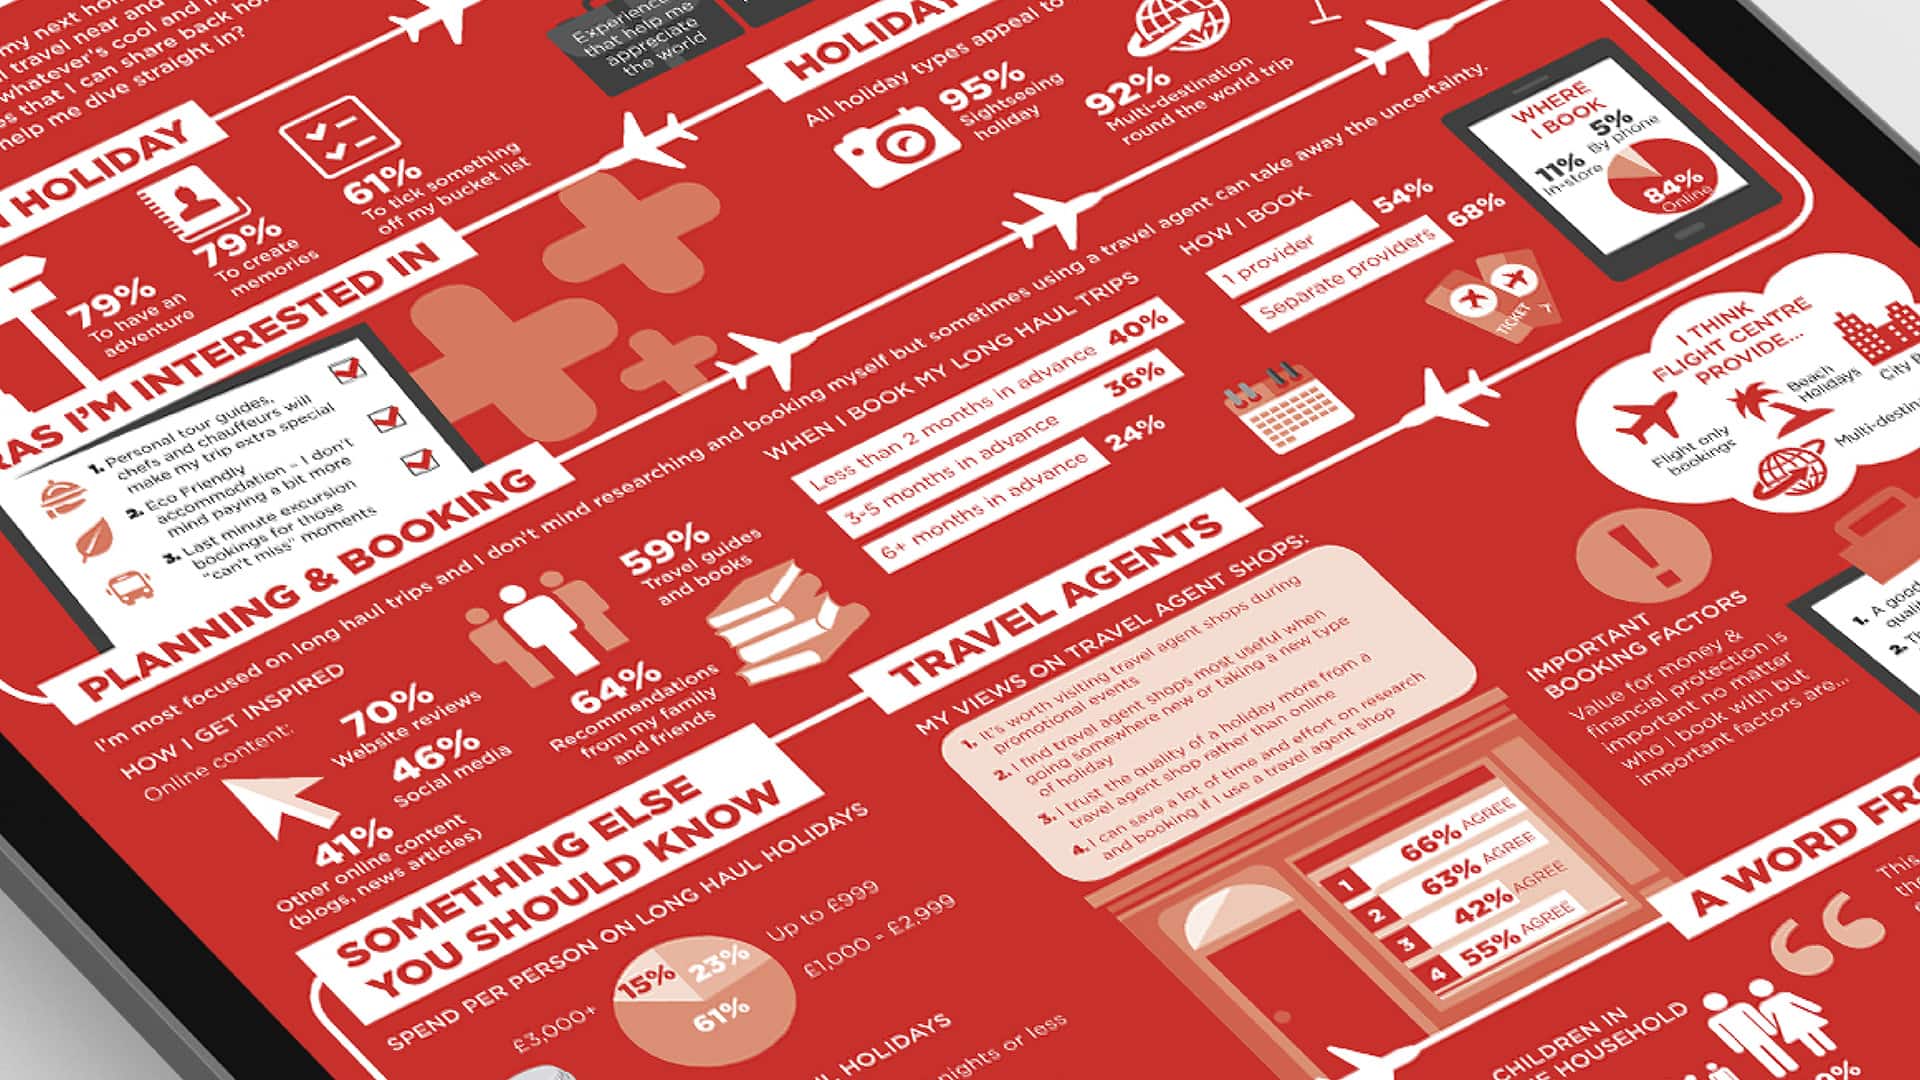 A close-up section of a tablet displaying a red coloured Flight Centre Infographic